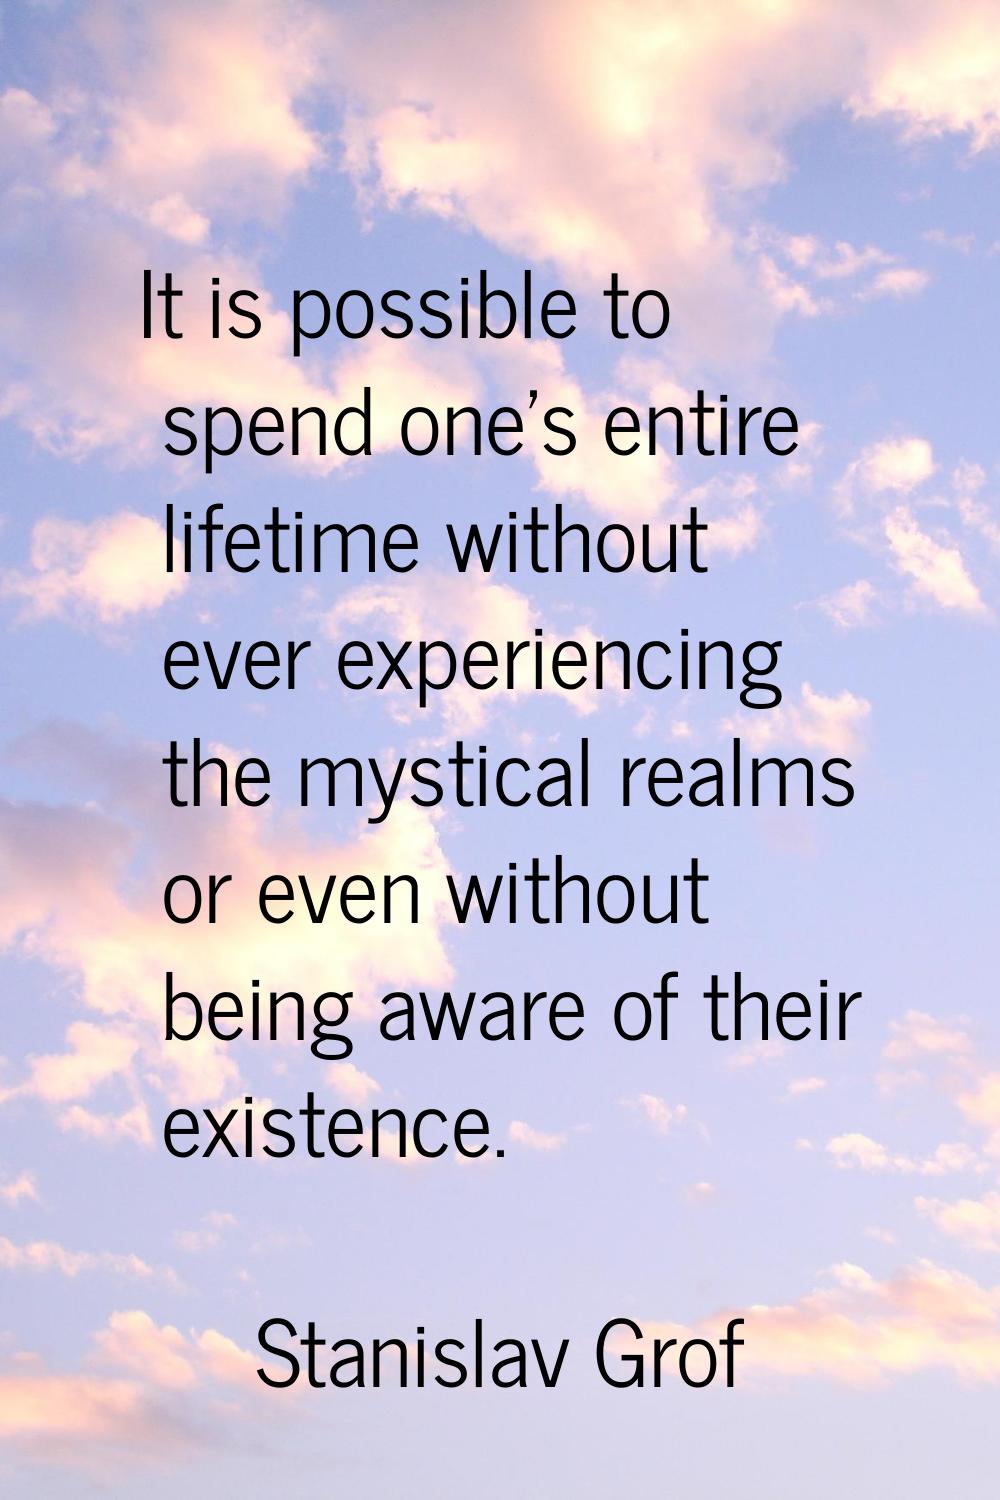 It is possible to spend one's entire lifetime without ever experiencing the mystical realms or even